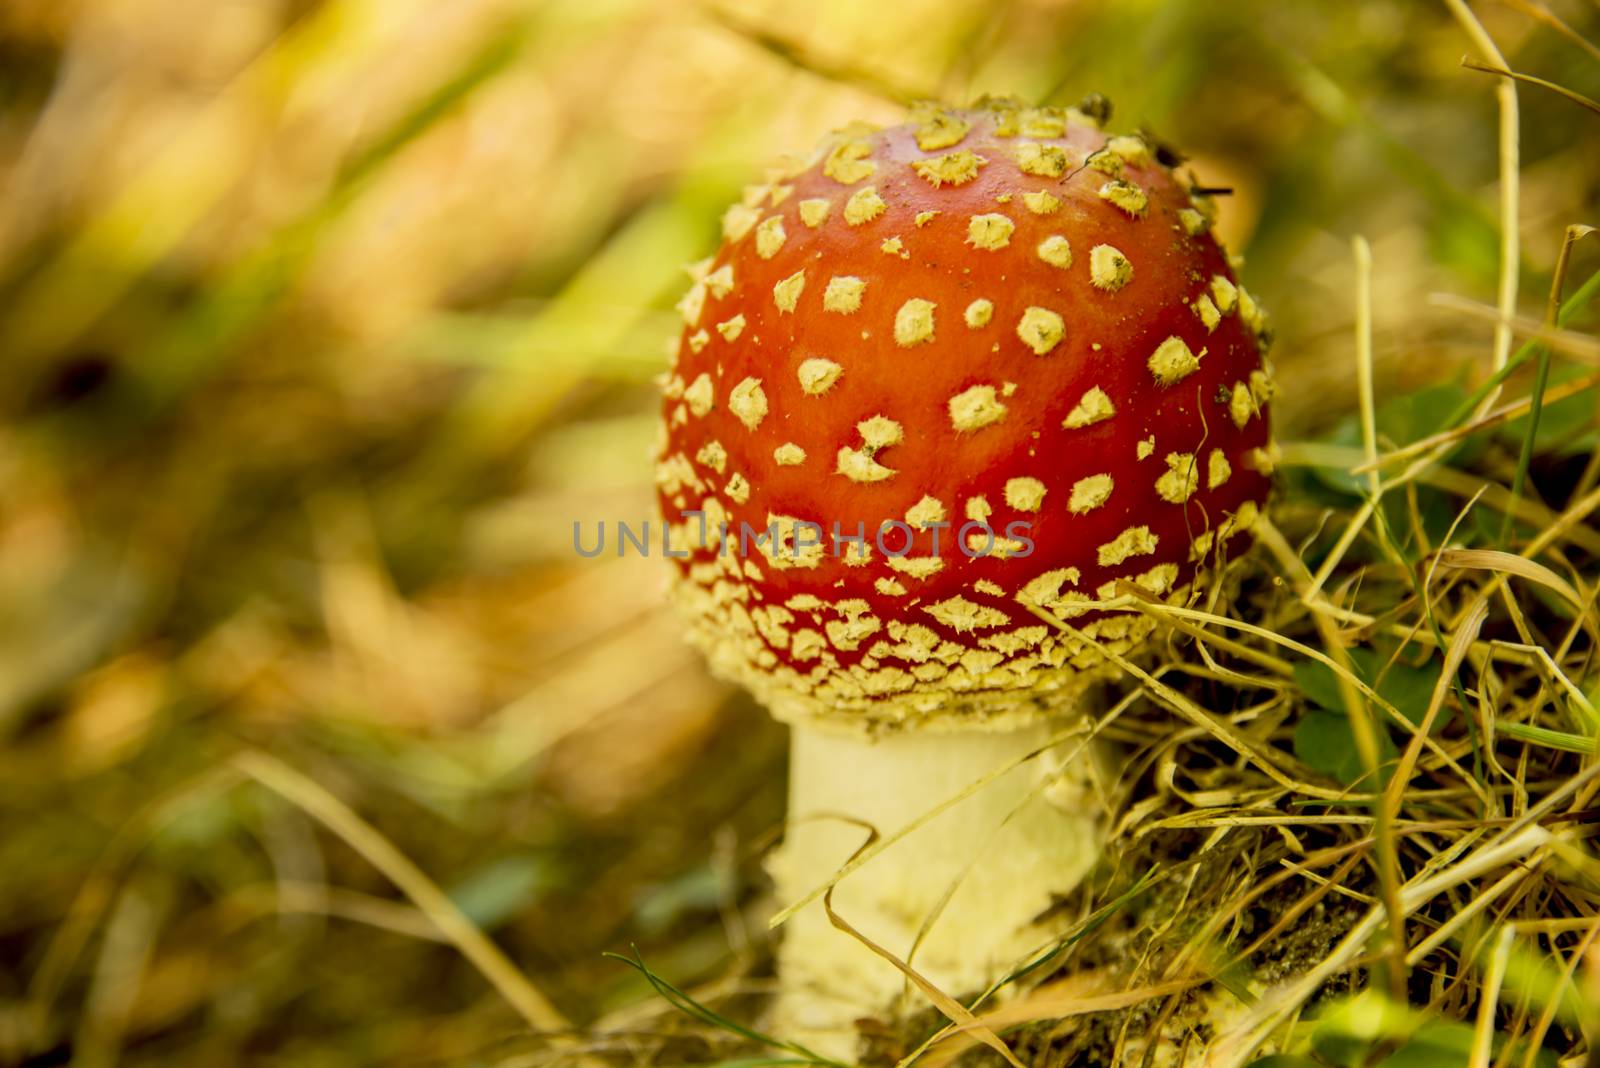 A small red fly agaric in the forest